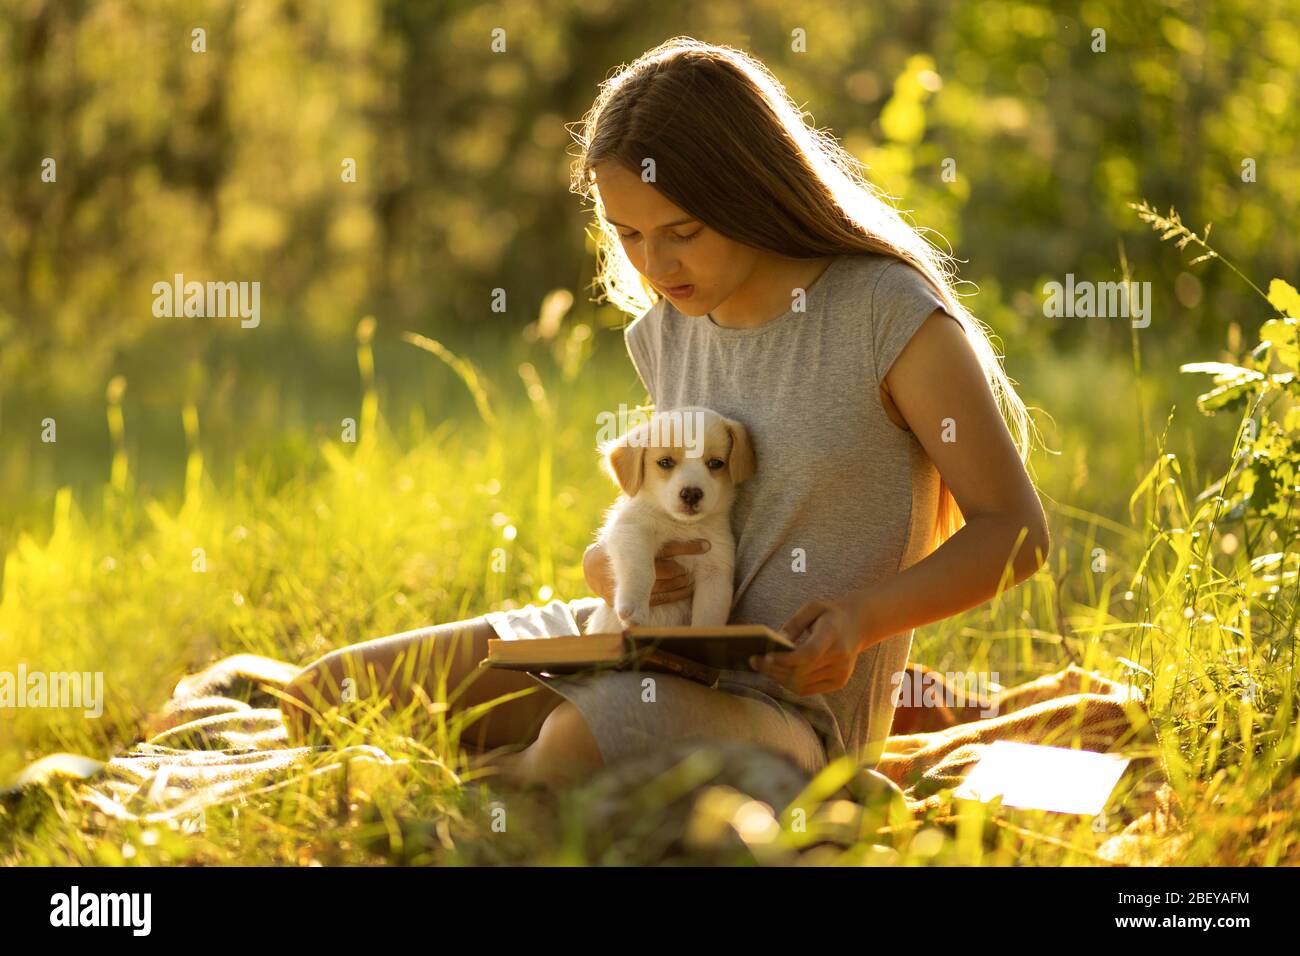 A girl sitting near a tree and reading a book, holding a labrador puppy.  Stock Photo